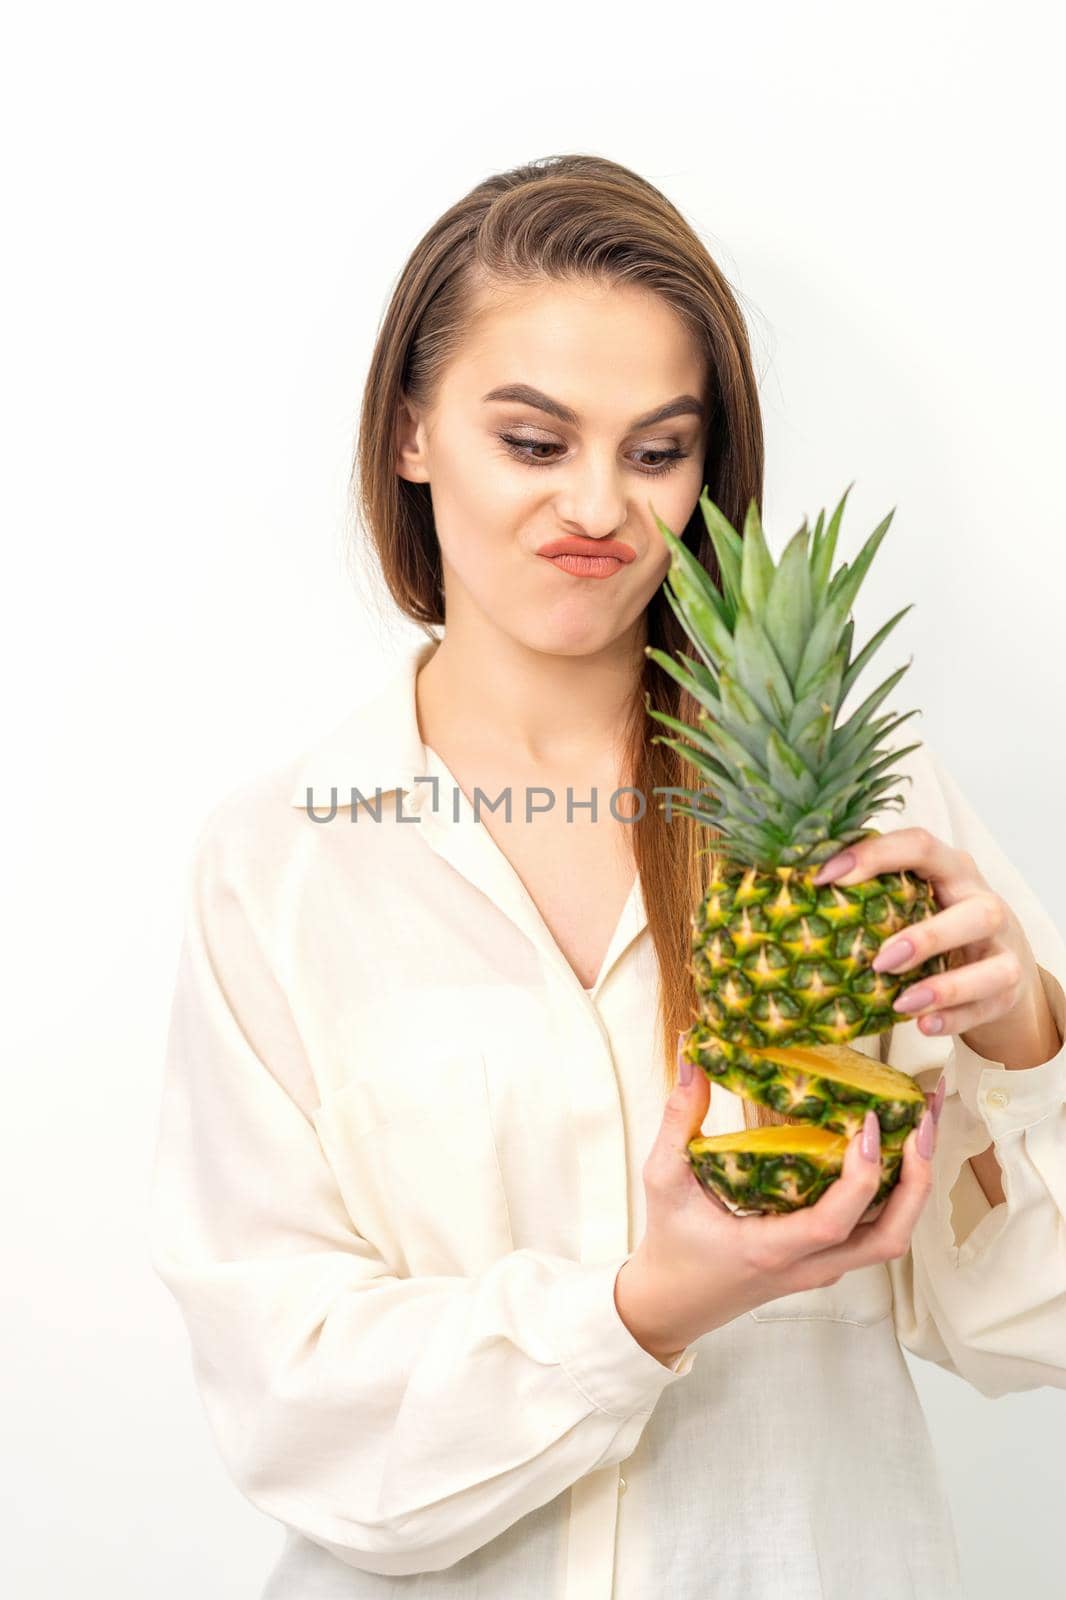 Beautiful young Caucasian woman holding pineapple and disappointed looking wearing a white shirt over white background